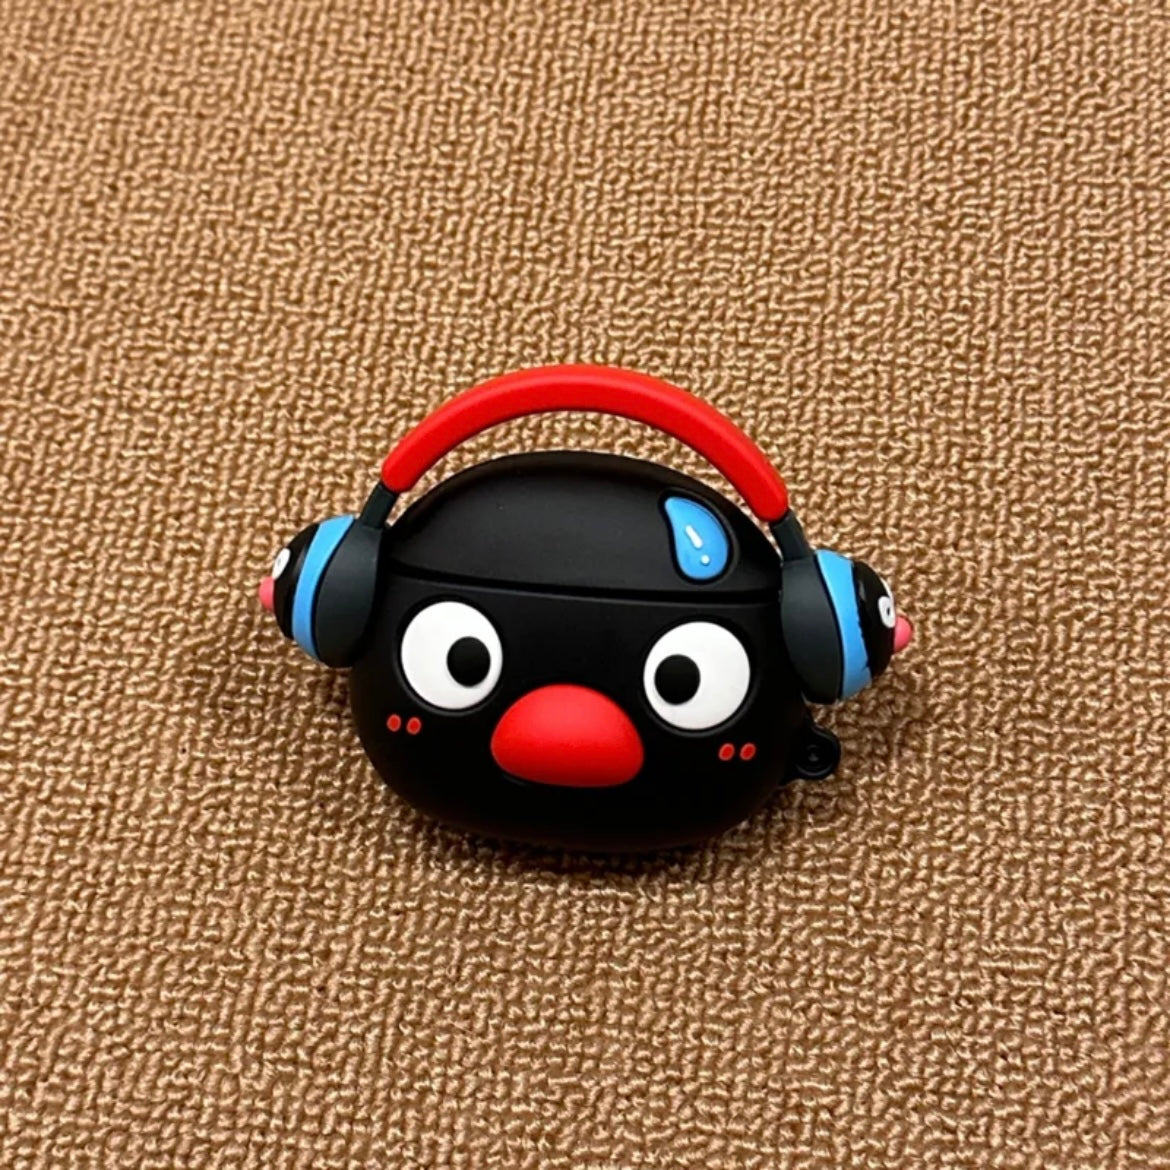 Black Penguin-Shaped AirPods Silicone Earphone Protective Case